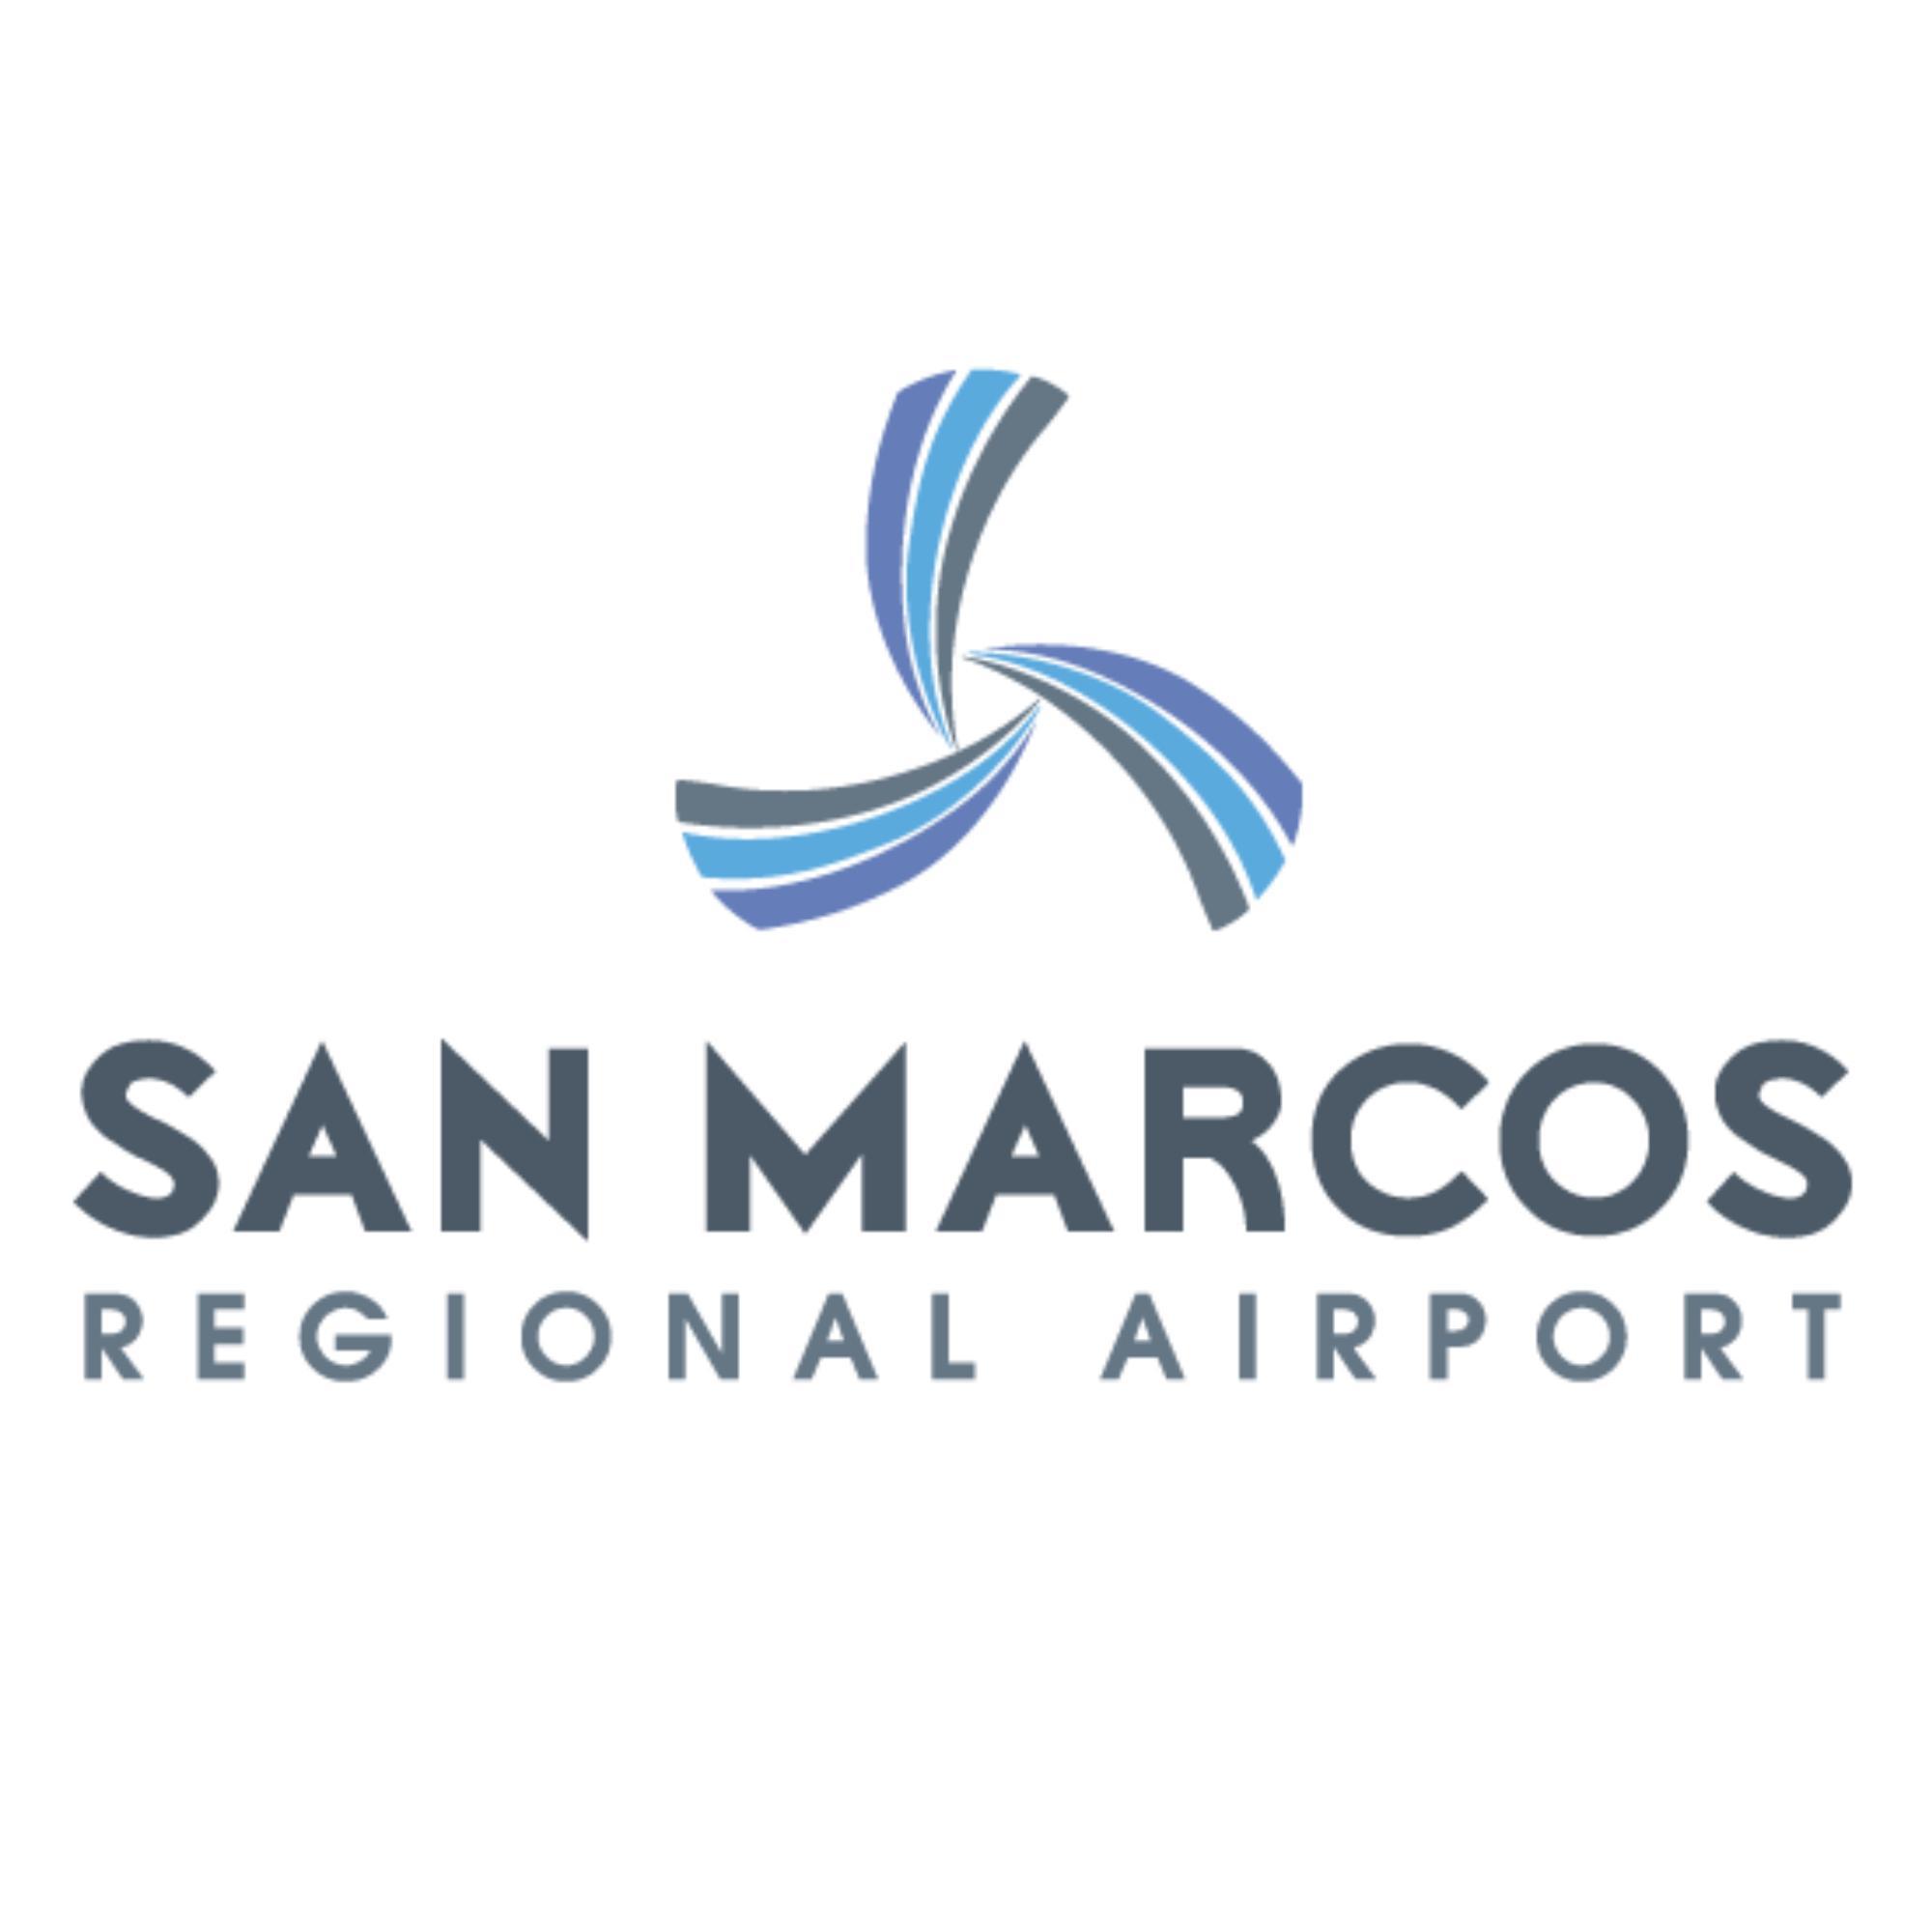 San Marcos Regional Airport (HYI) is professionally managed by Texas Aviation Partners.  http://t.co/8aEKo7Z32E